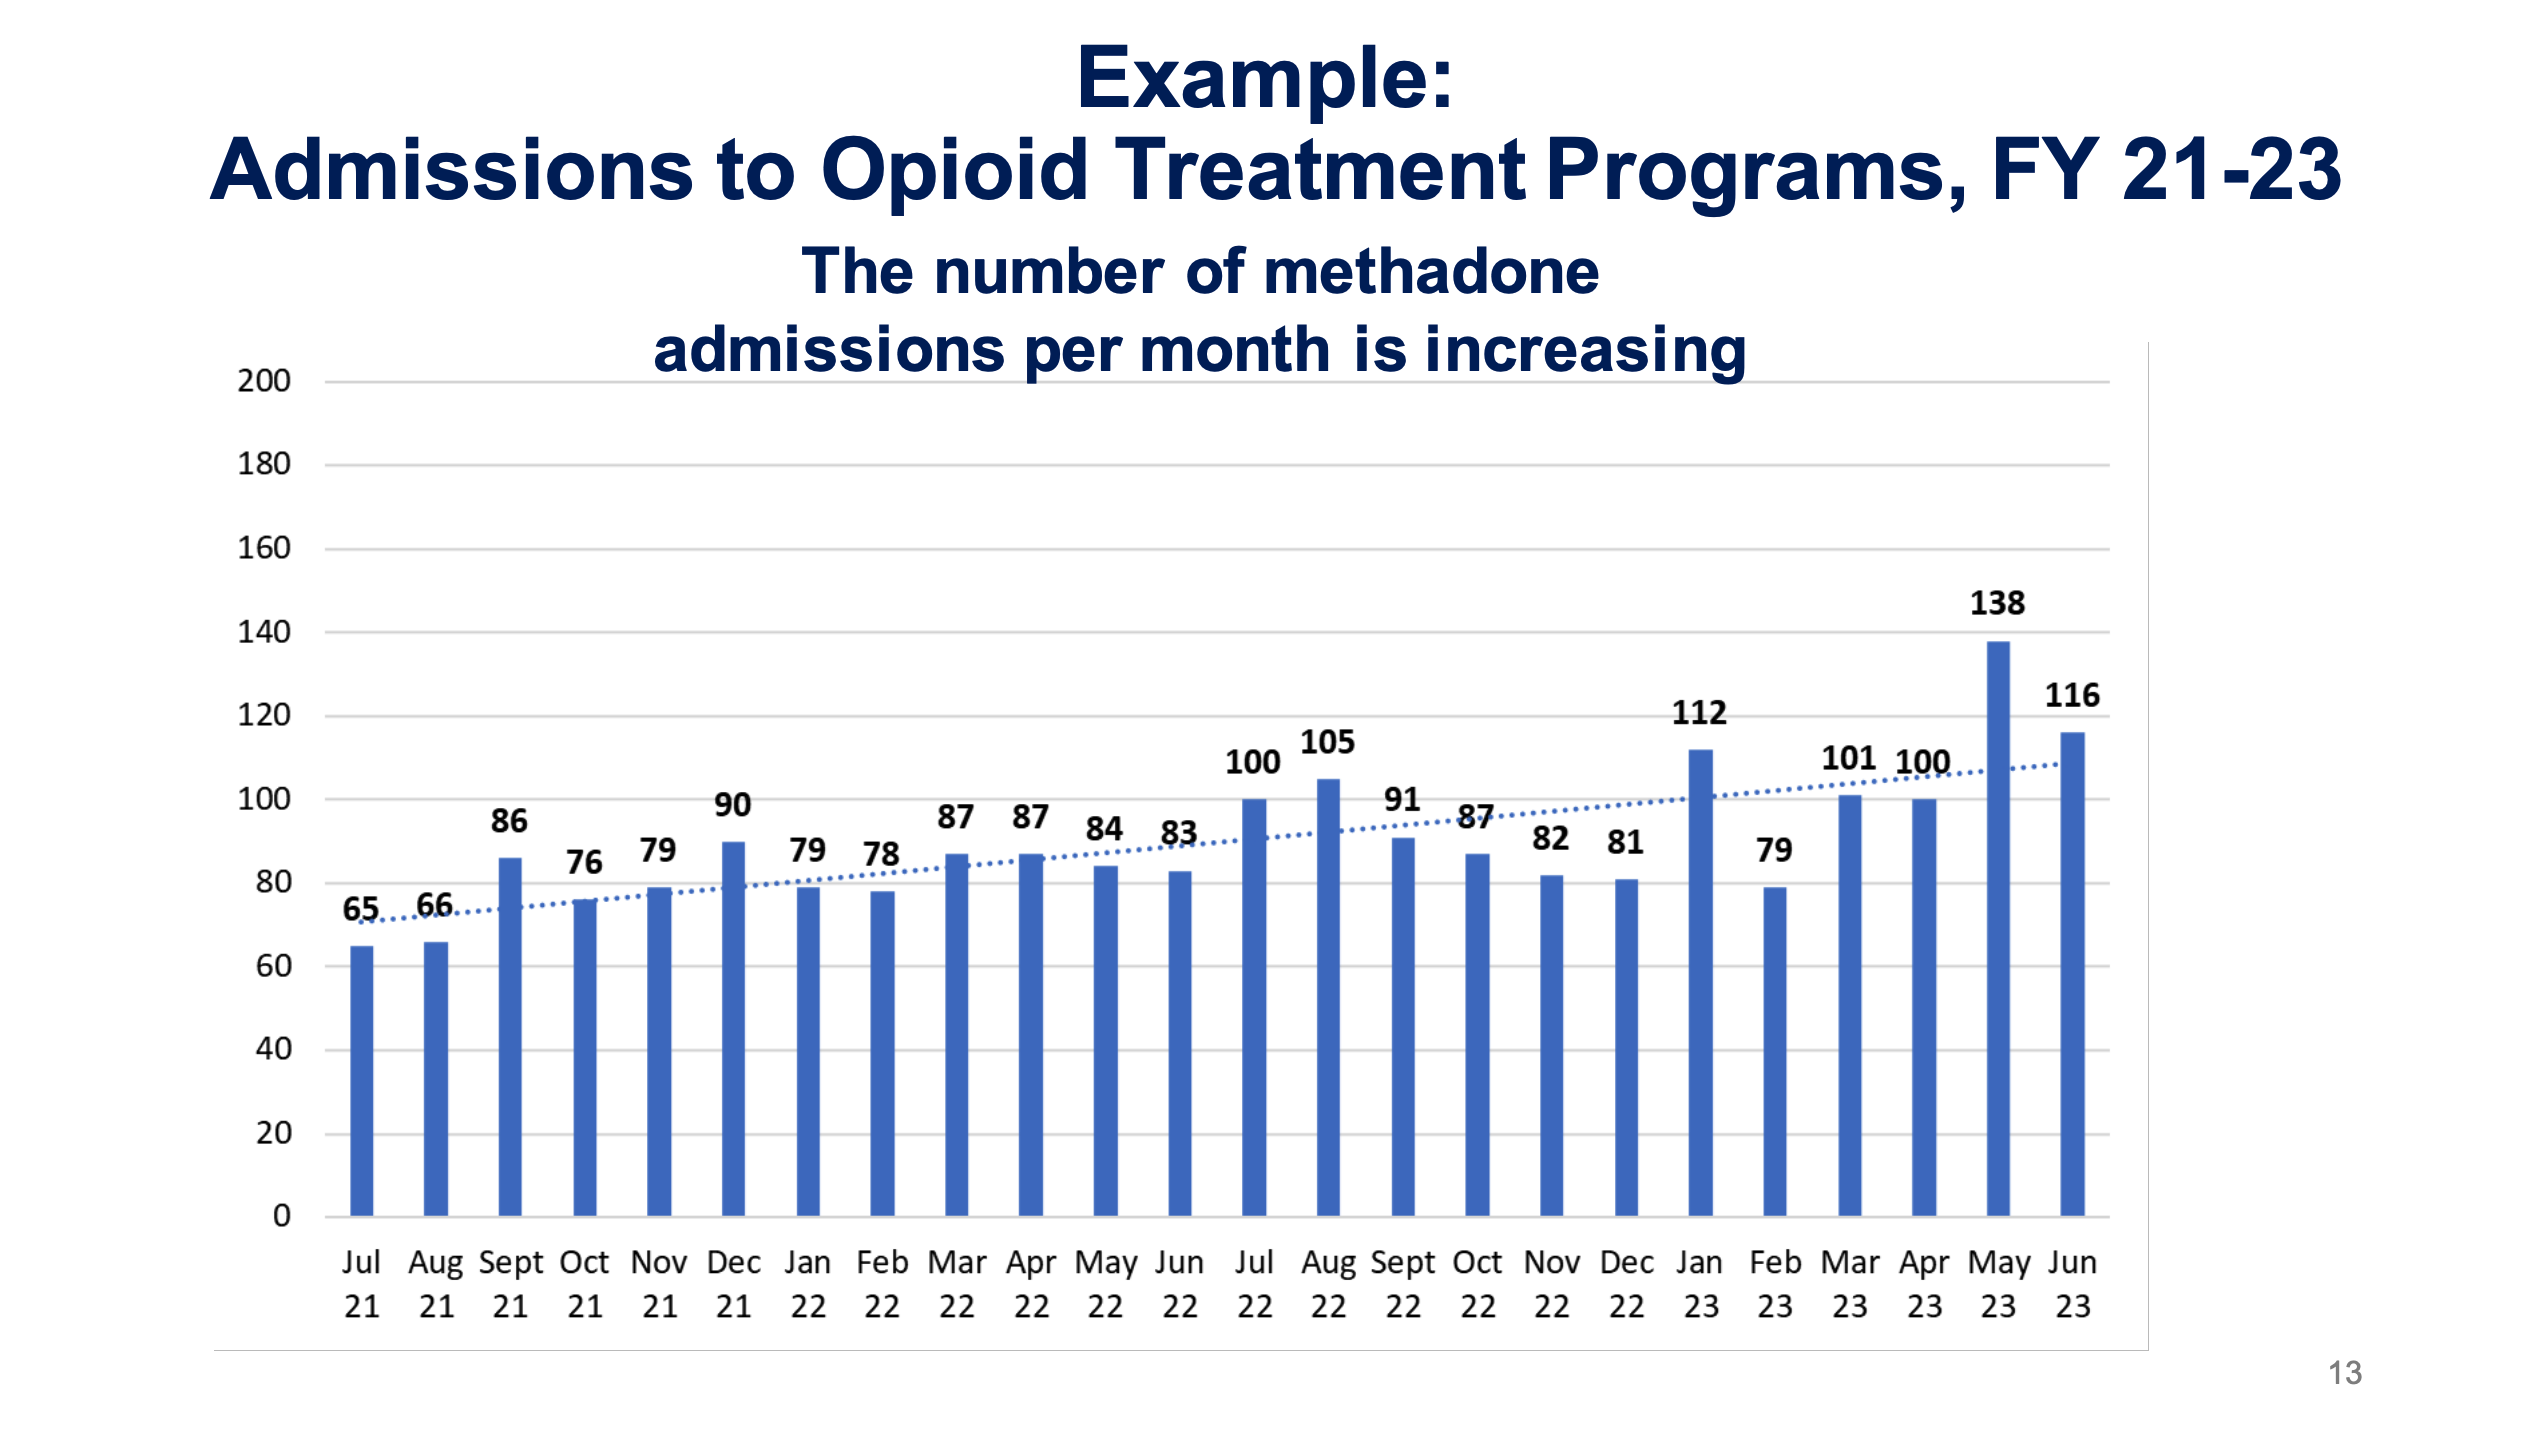 A bar chart with a trend line showing admissions to opioid treatment programs in San Francisco have steadily increased.